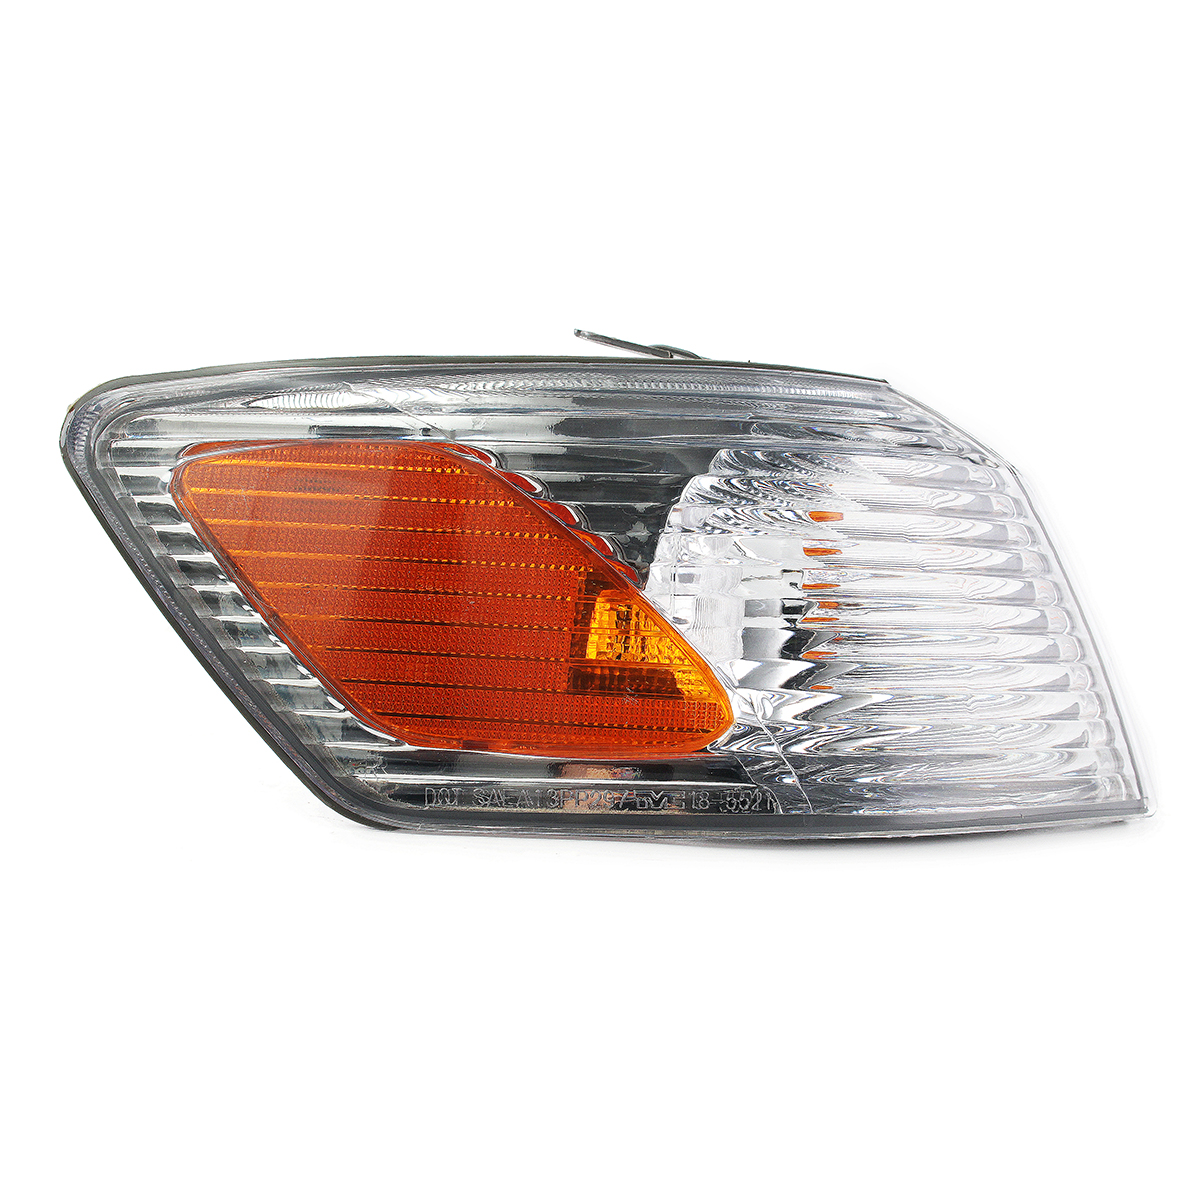 Front Right Side Marker Lights Parking Corner Turn Signal Lamp Cover for Toyota Camry 2000-2001